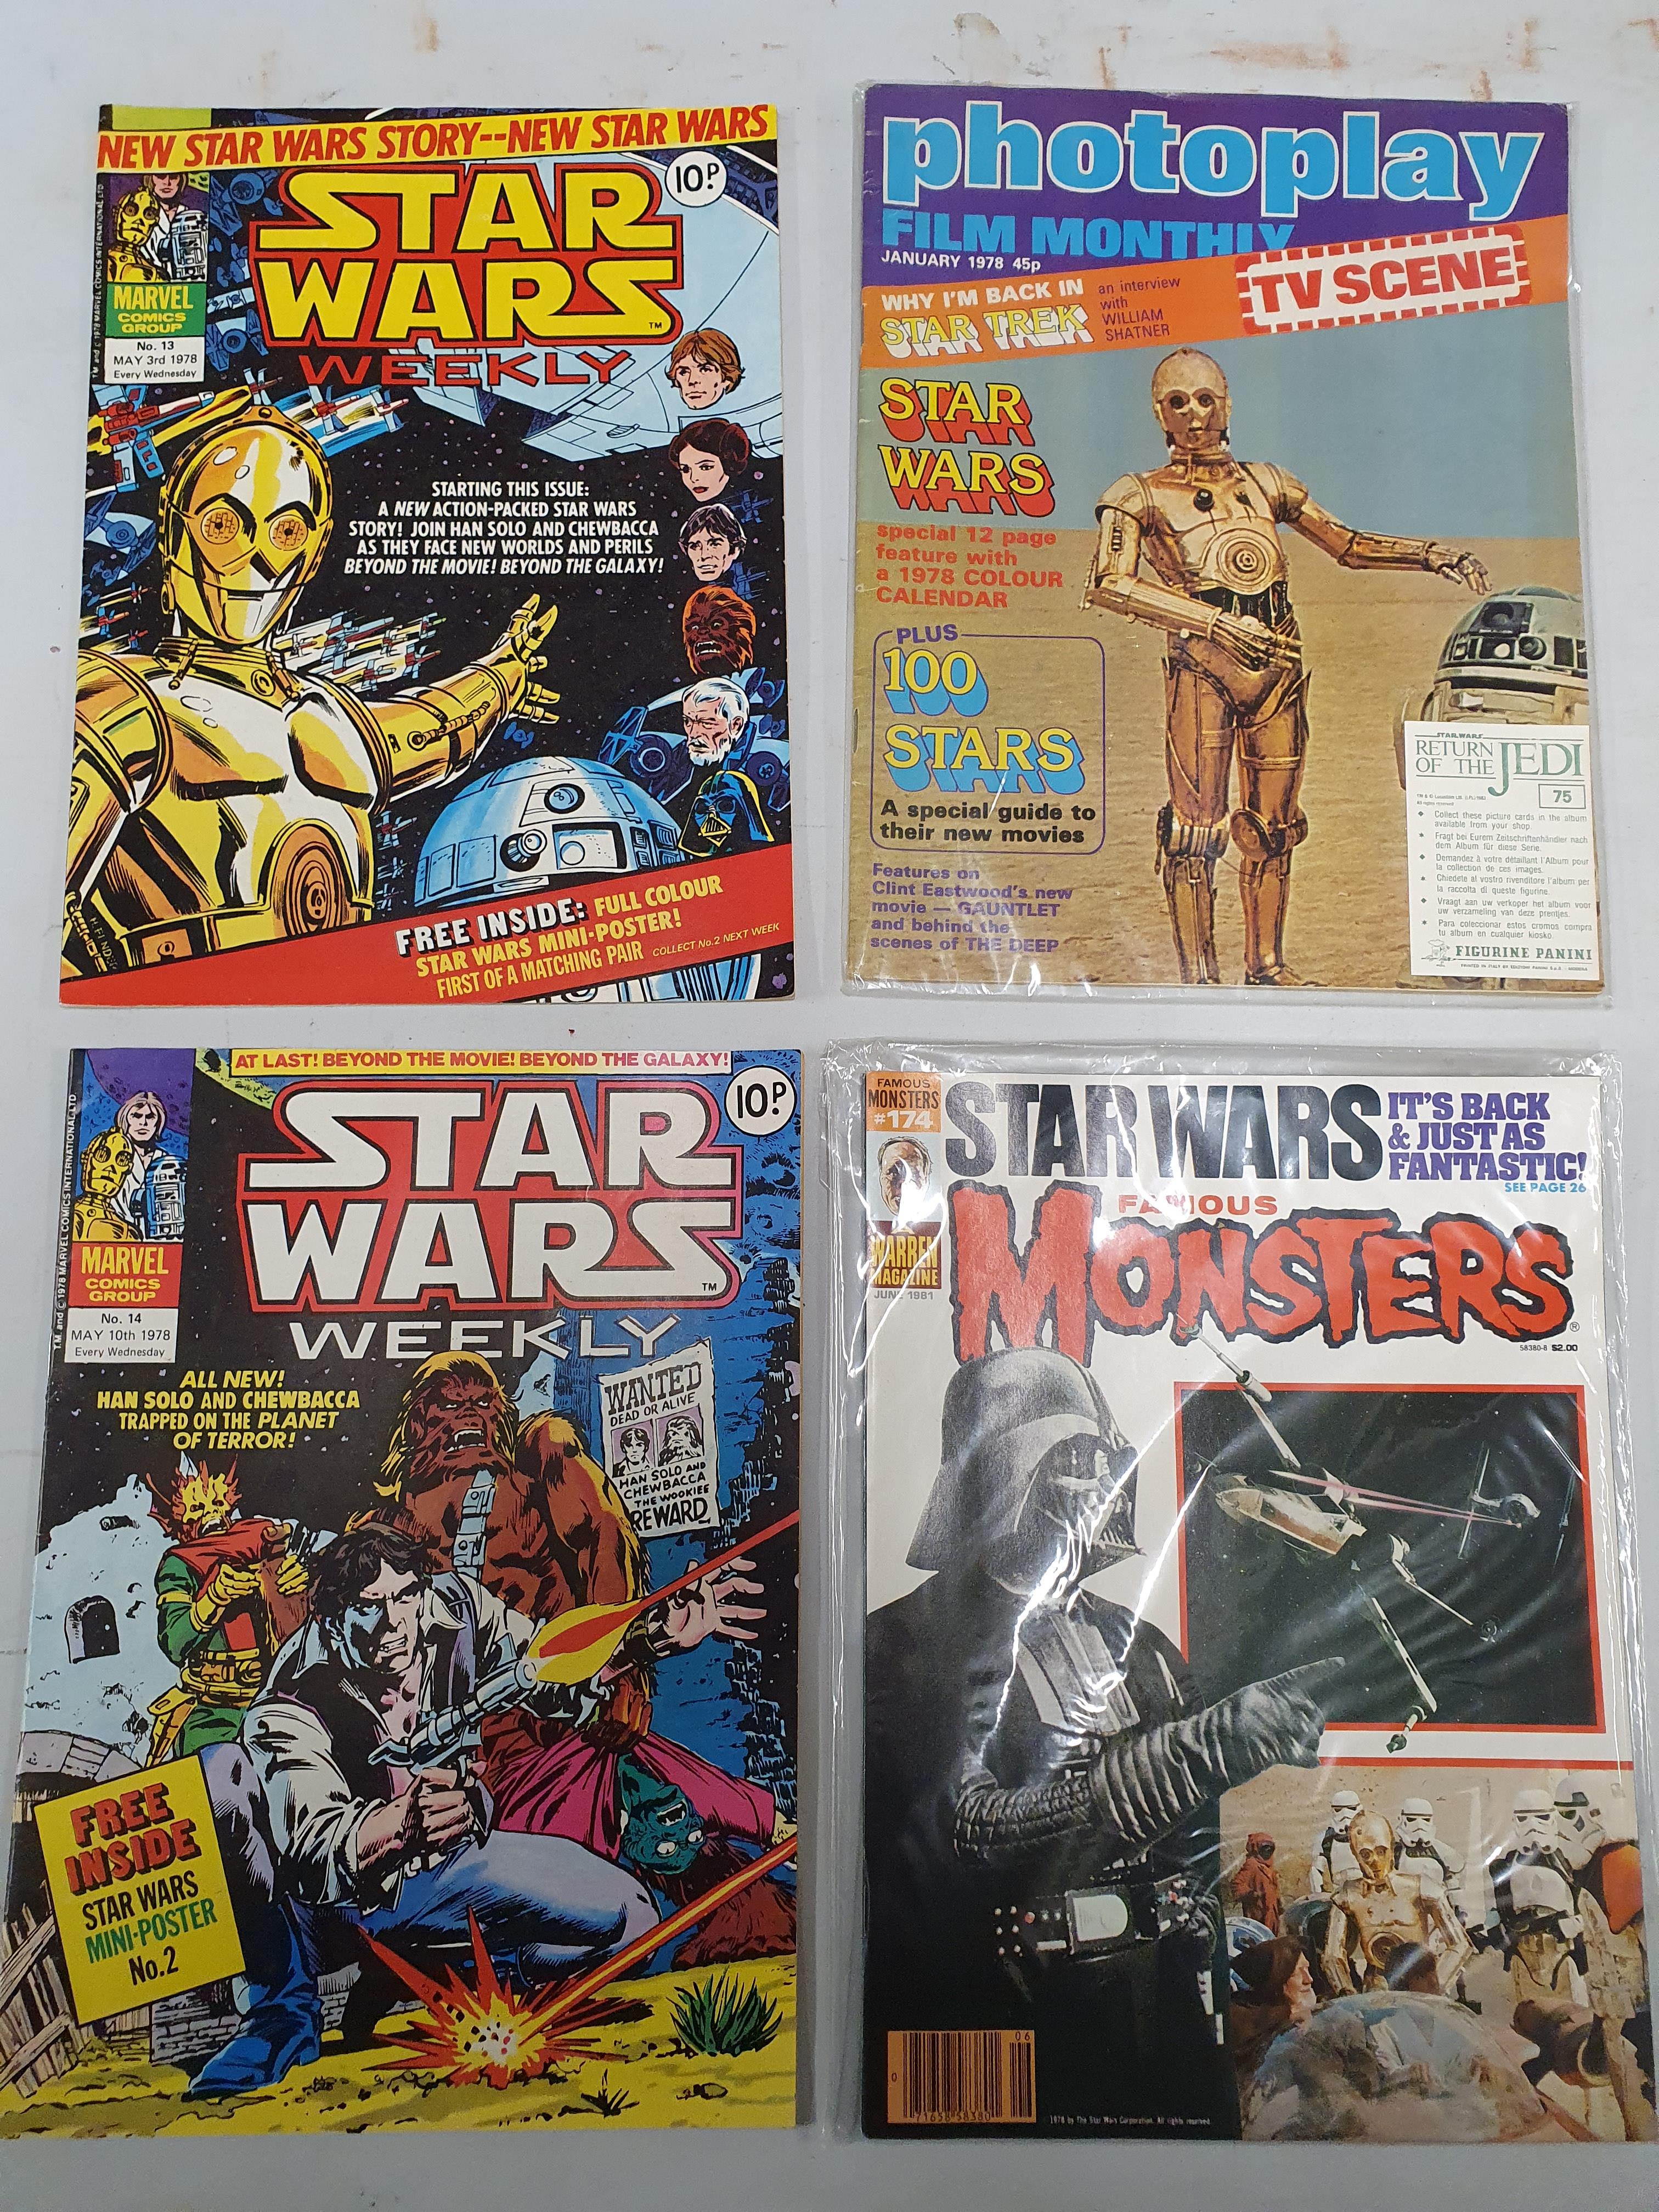 WITHDRAWN Two Marvel Comics issues - Star Wars Weekly